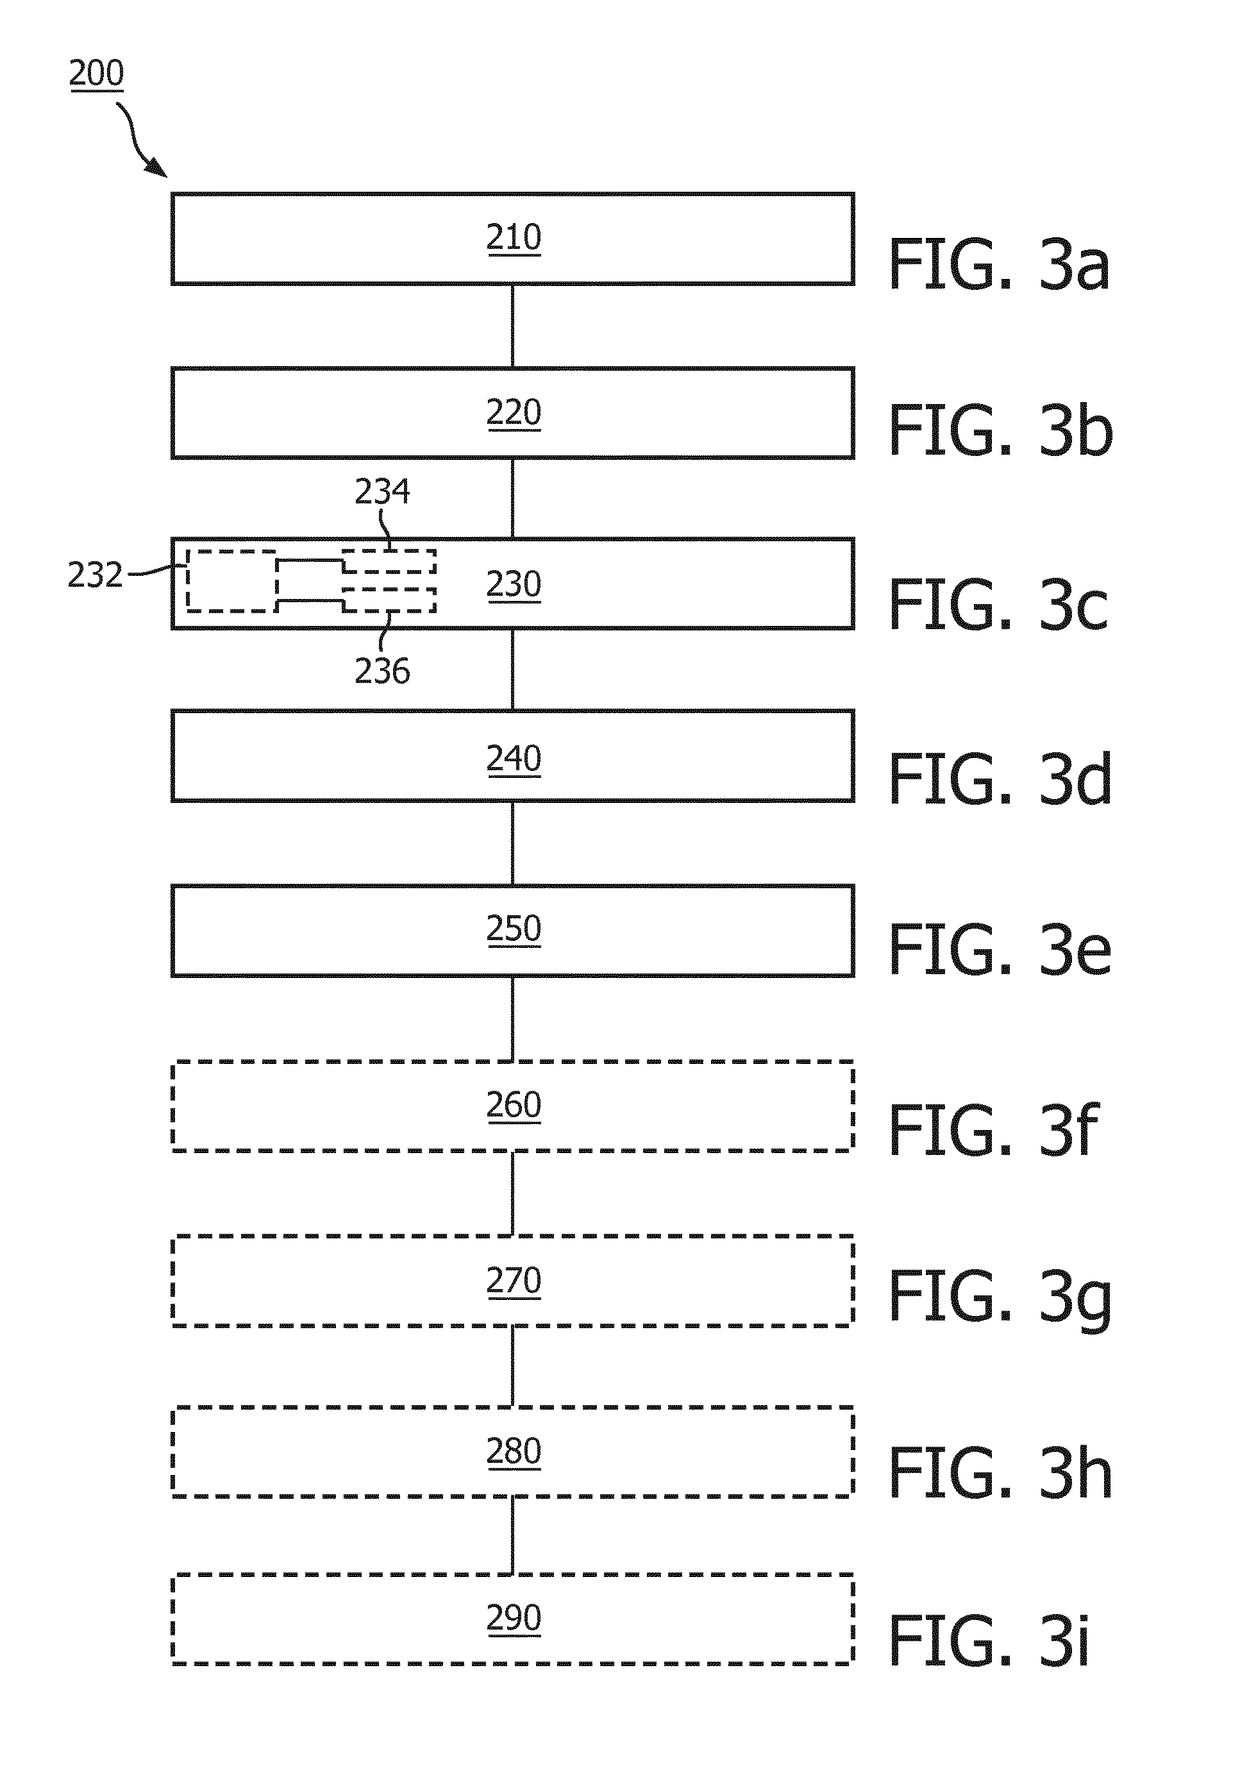 Device for use in improving a user interaction with a user interface application